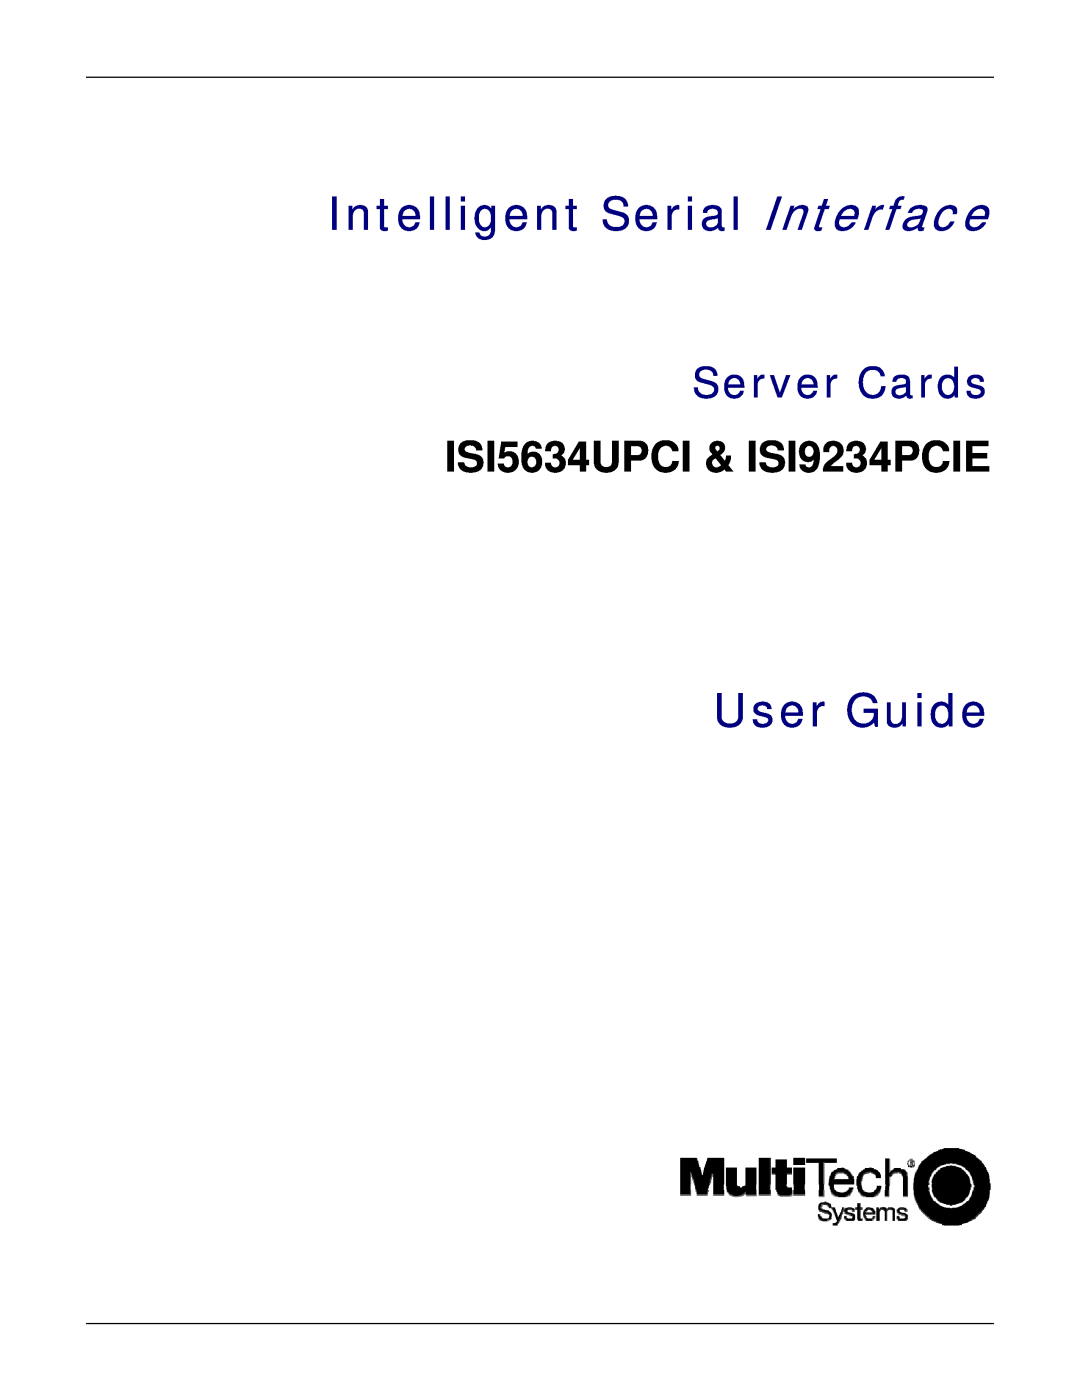 Multi-Tech Systems manual Intelligent Serial Interface, User Guide, Server Cards, ISI5634UPCI & ISI9234PCIE 